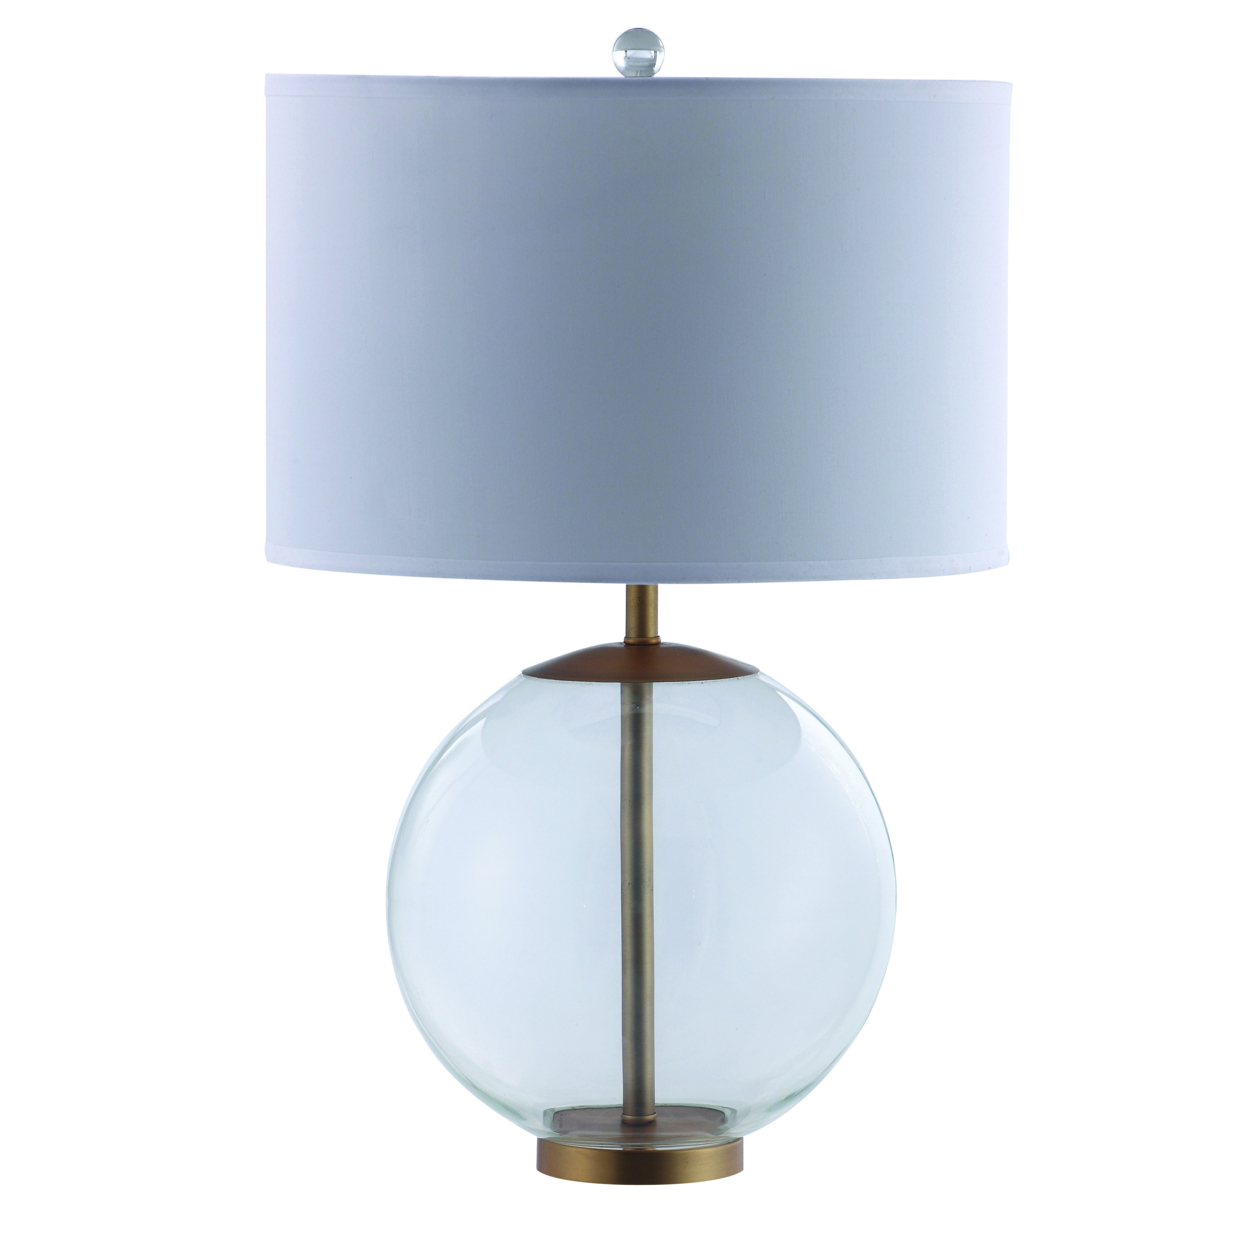 Drum Shade Metal Table Lamp With Glass Orb Accent, White And Brown- Saltoro Sherpi